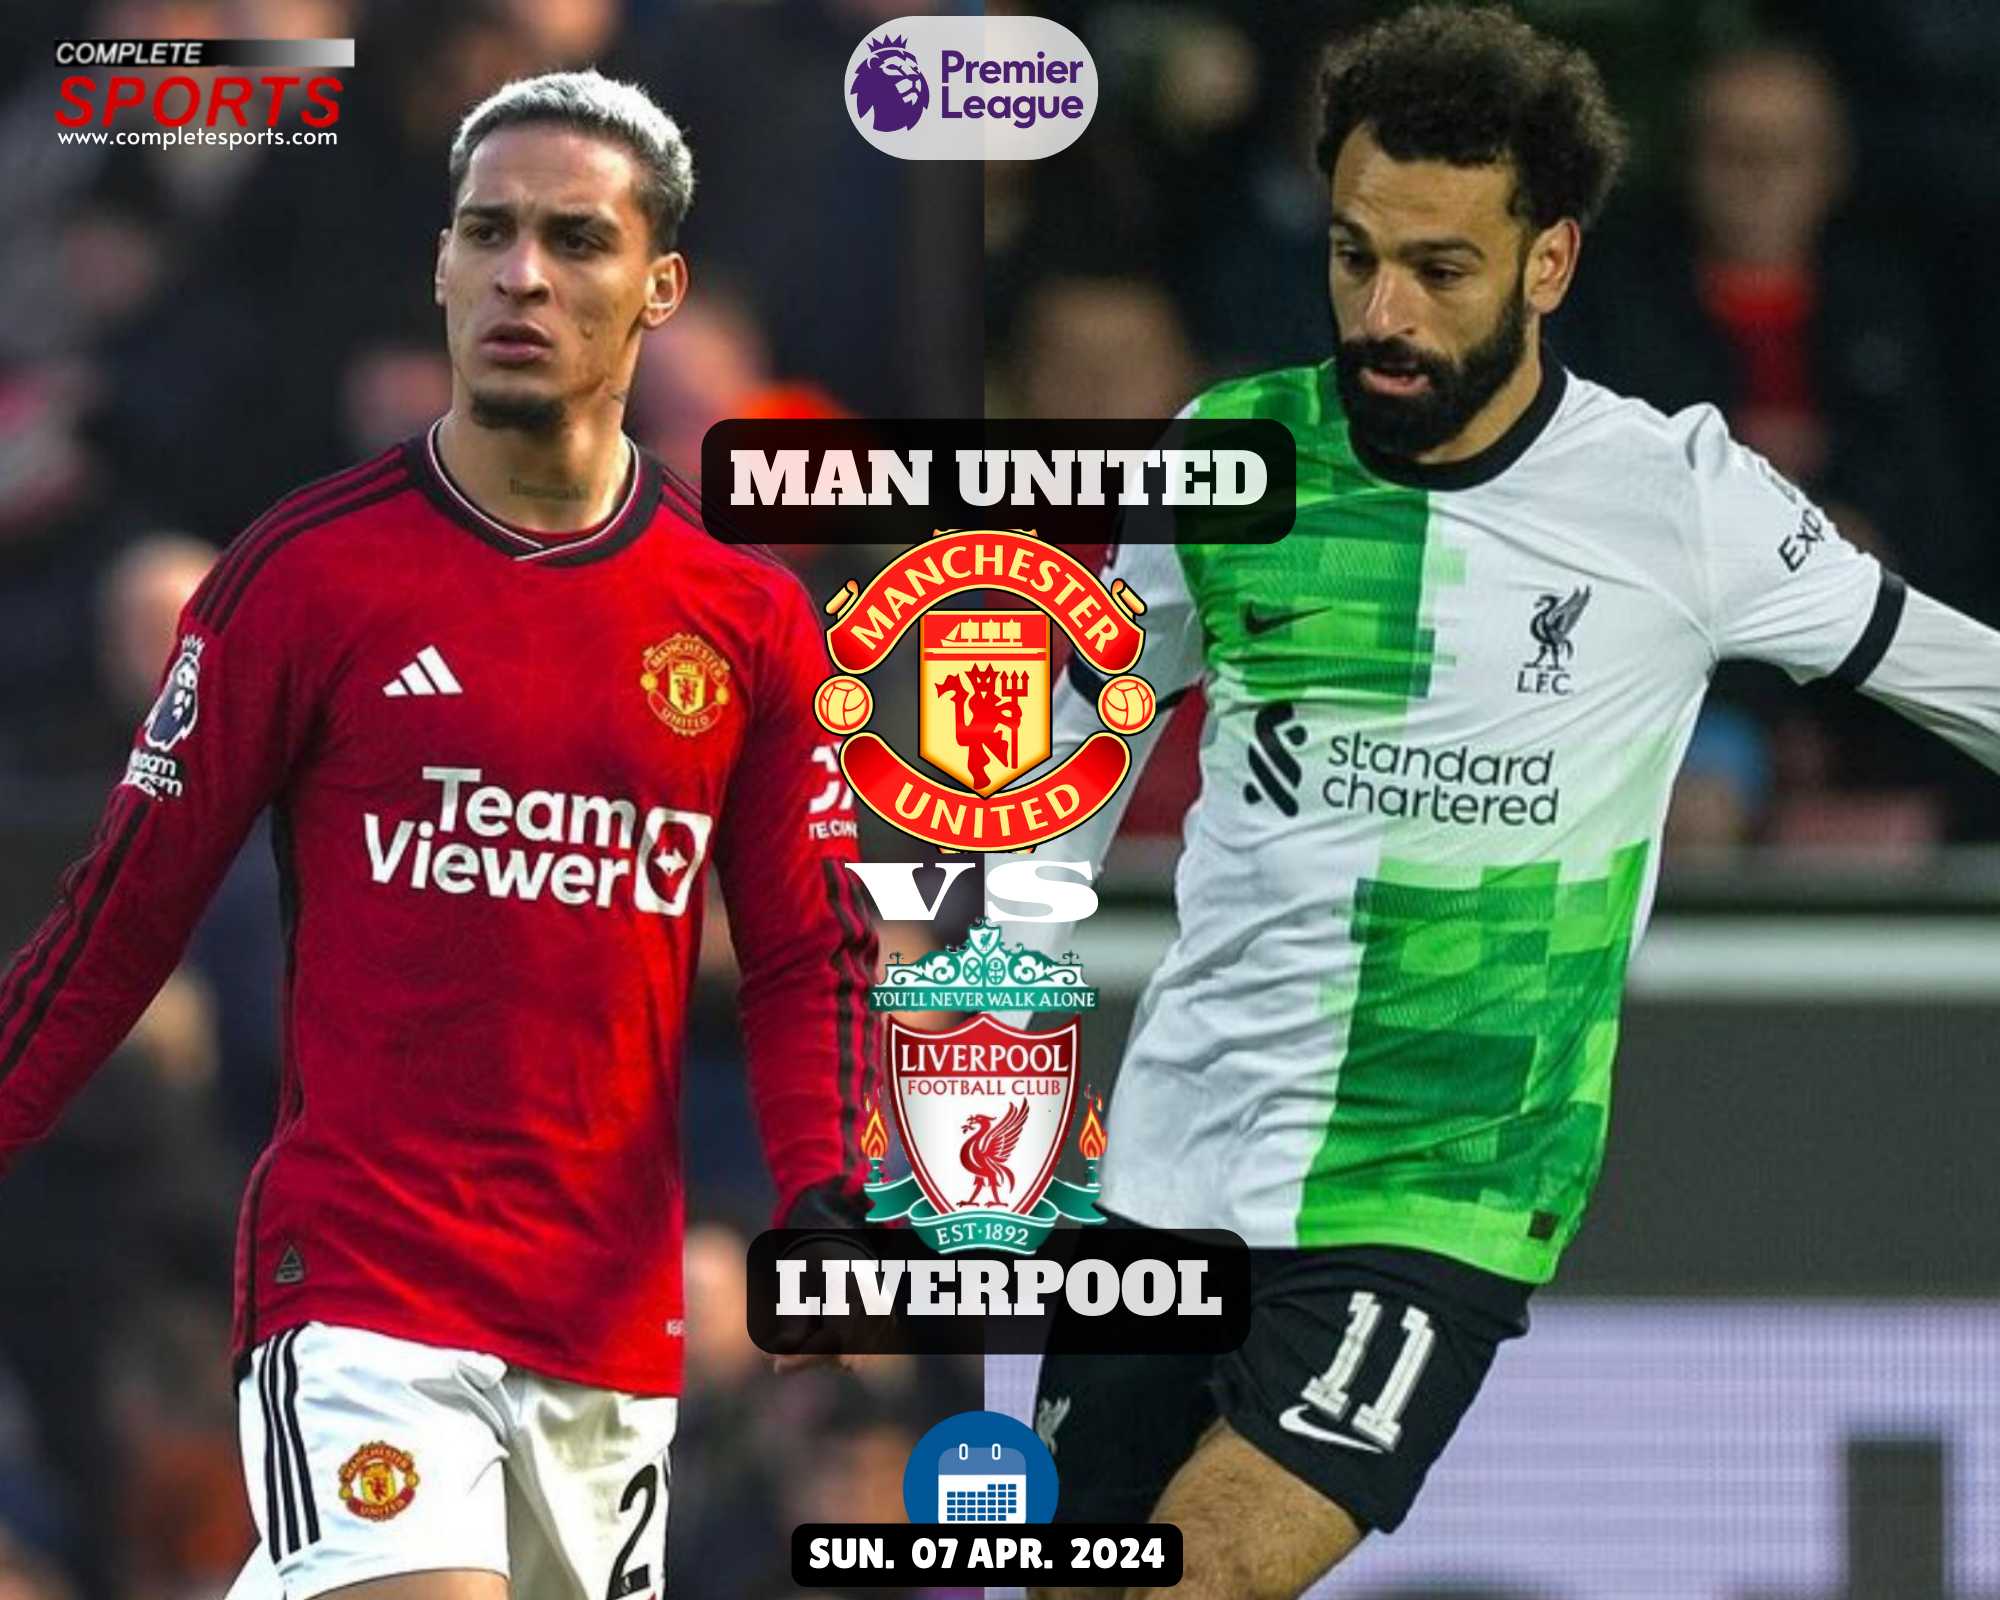 Manchester United Vs Liverpool: Predictions And Match Preview